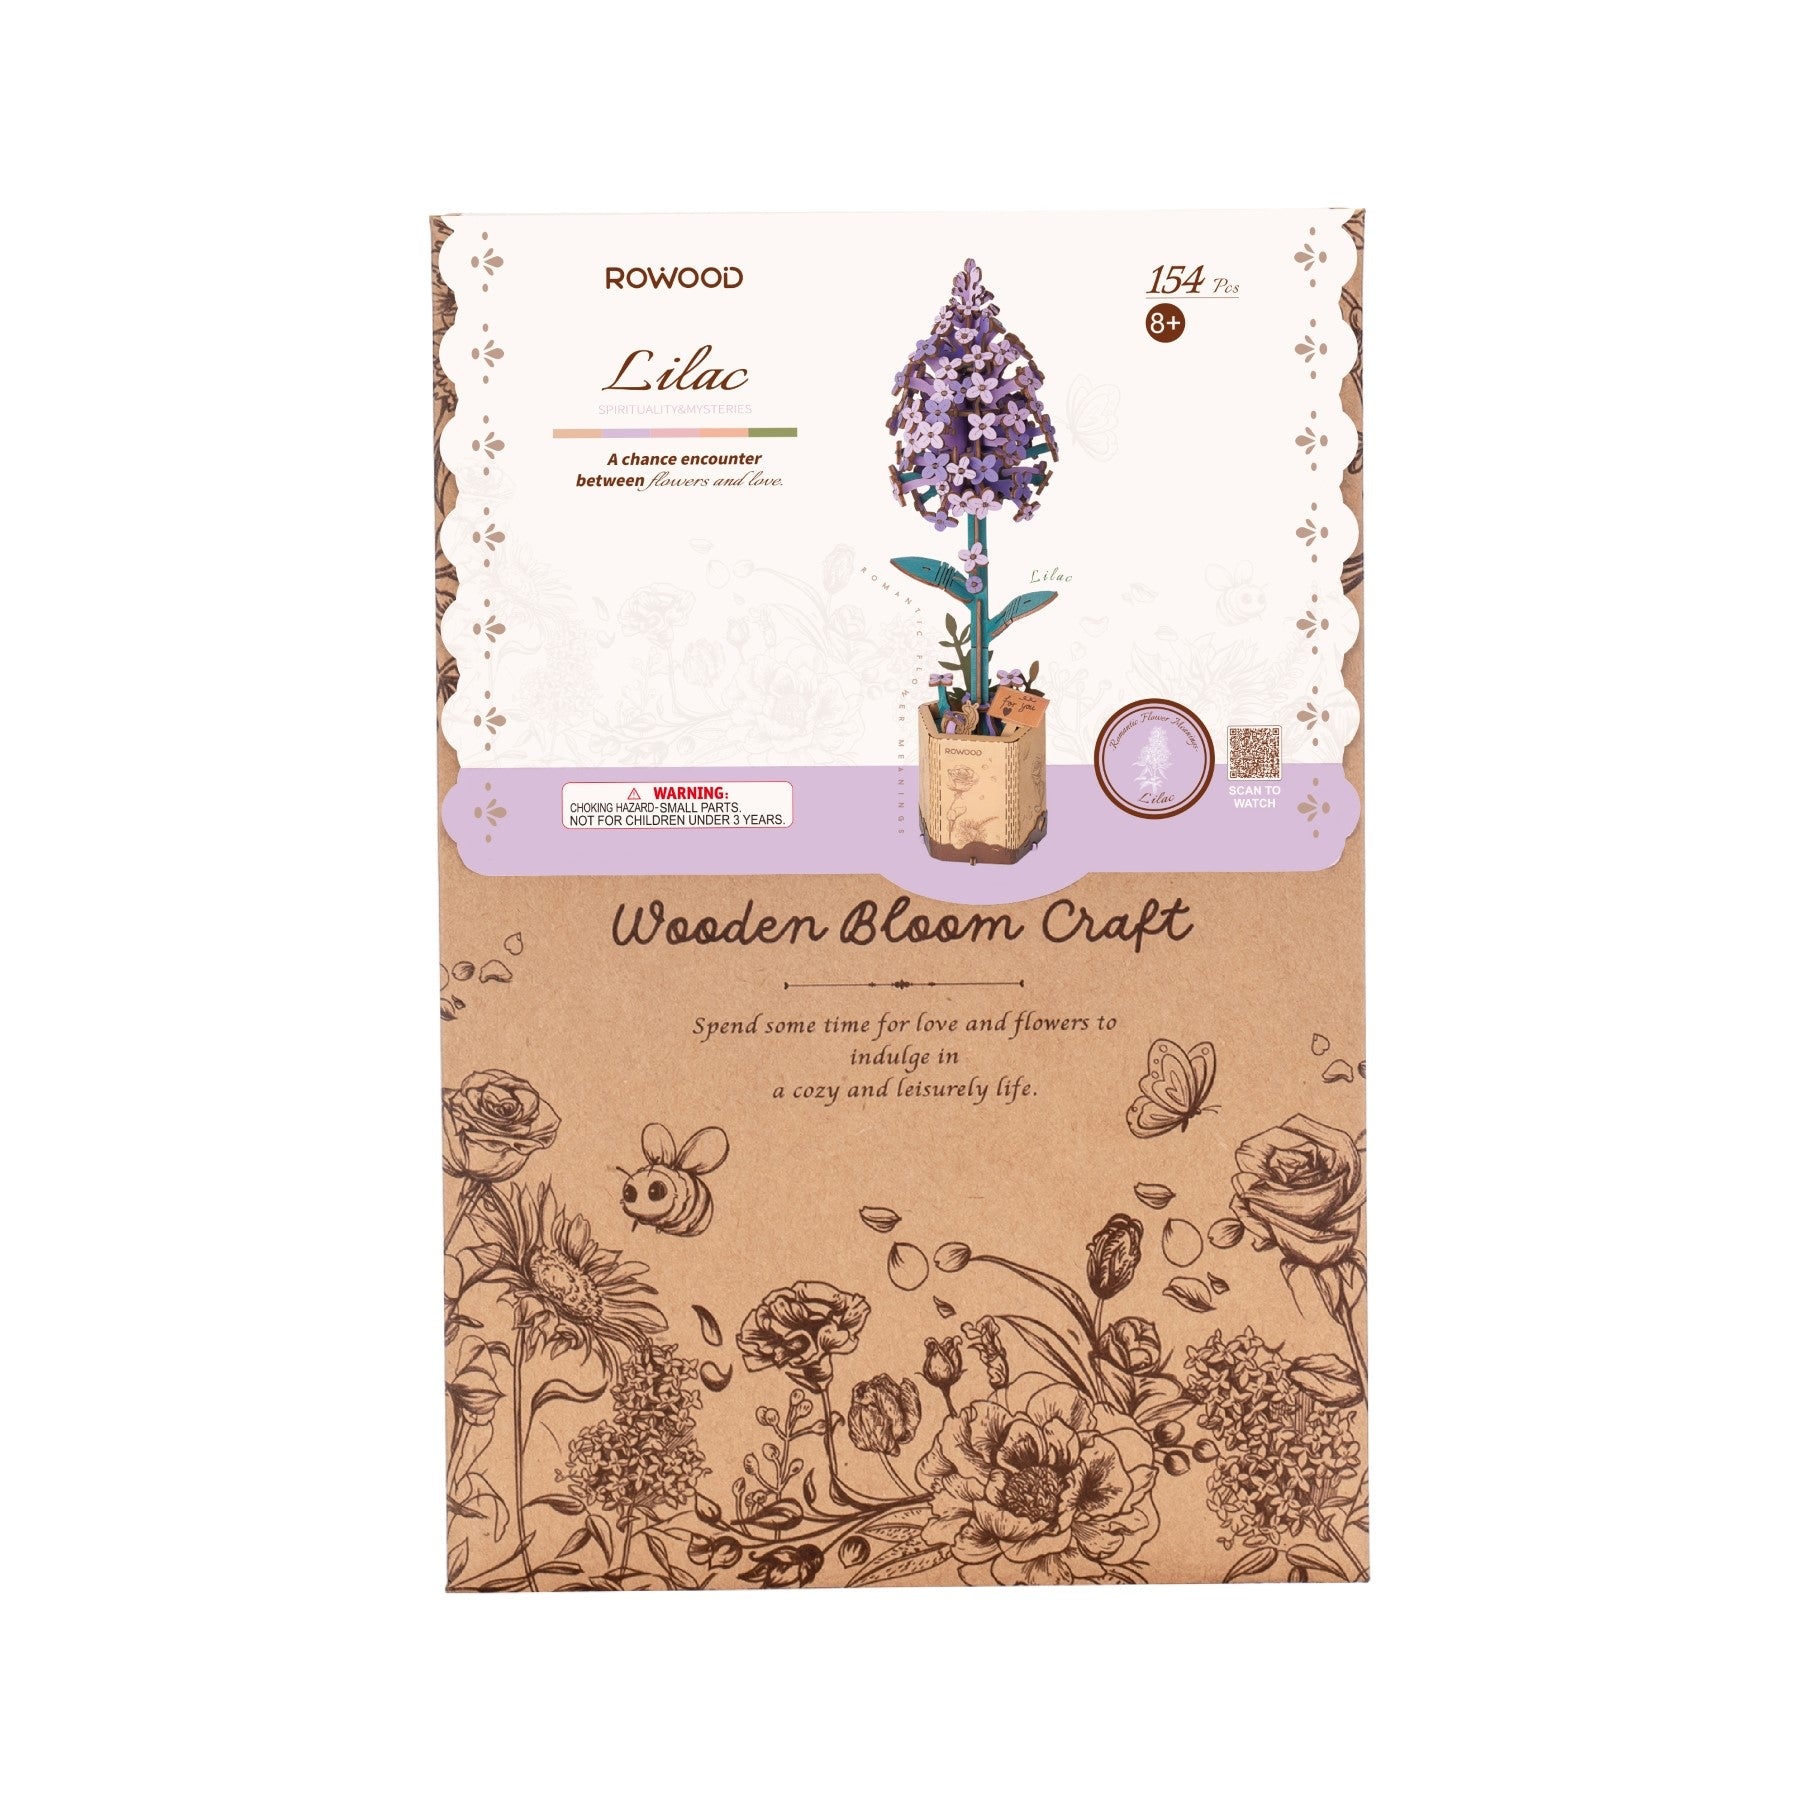 Lilac - Wooden Bloom Craft